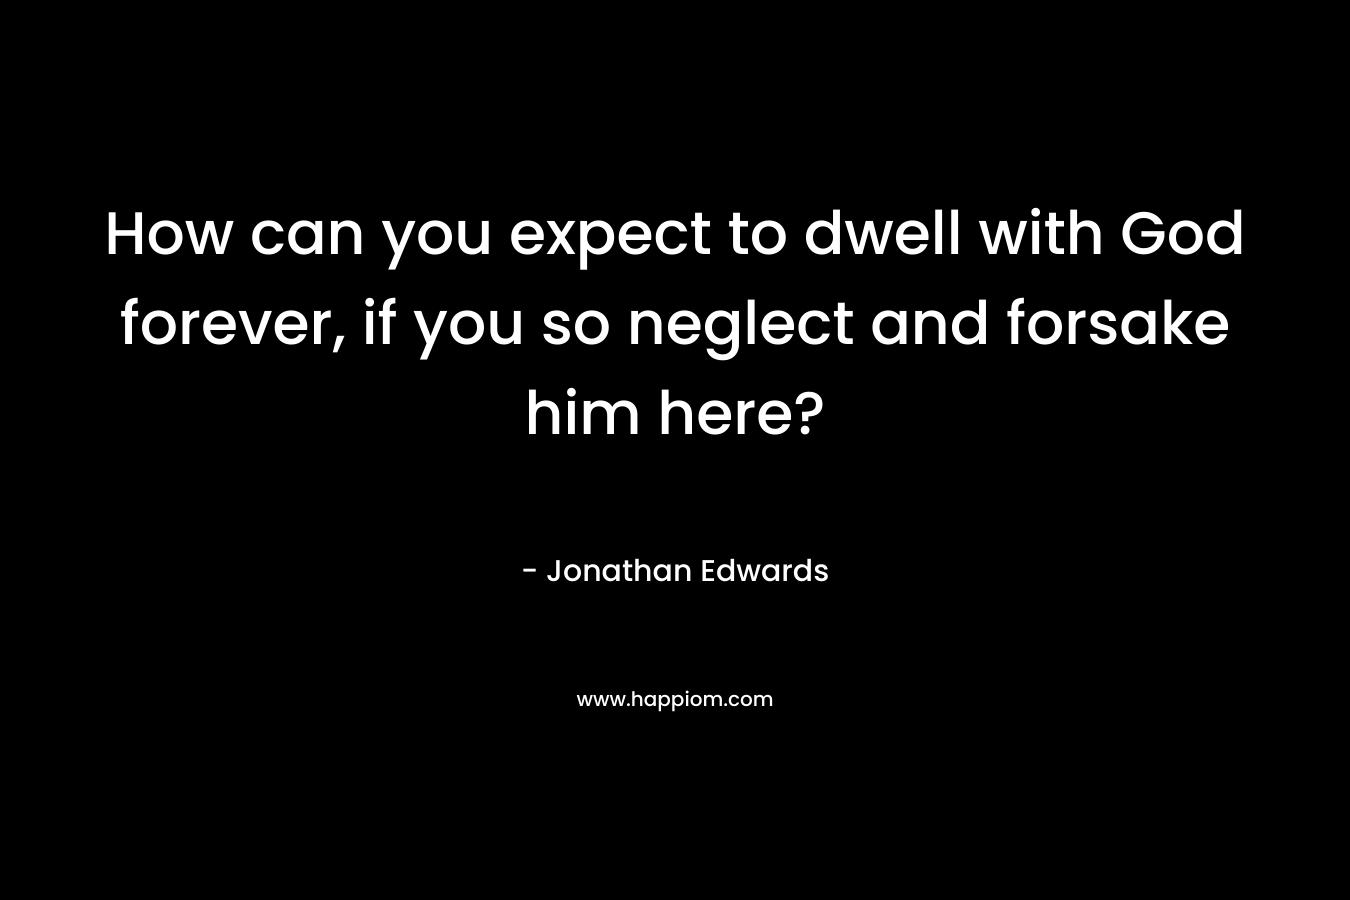 How can you expect to dwell with God forever, if you so neglect and forsake him here? – Jonathan Edwards